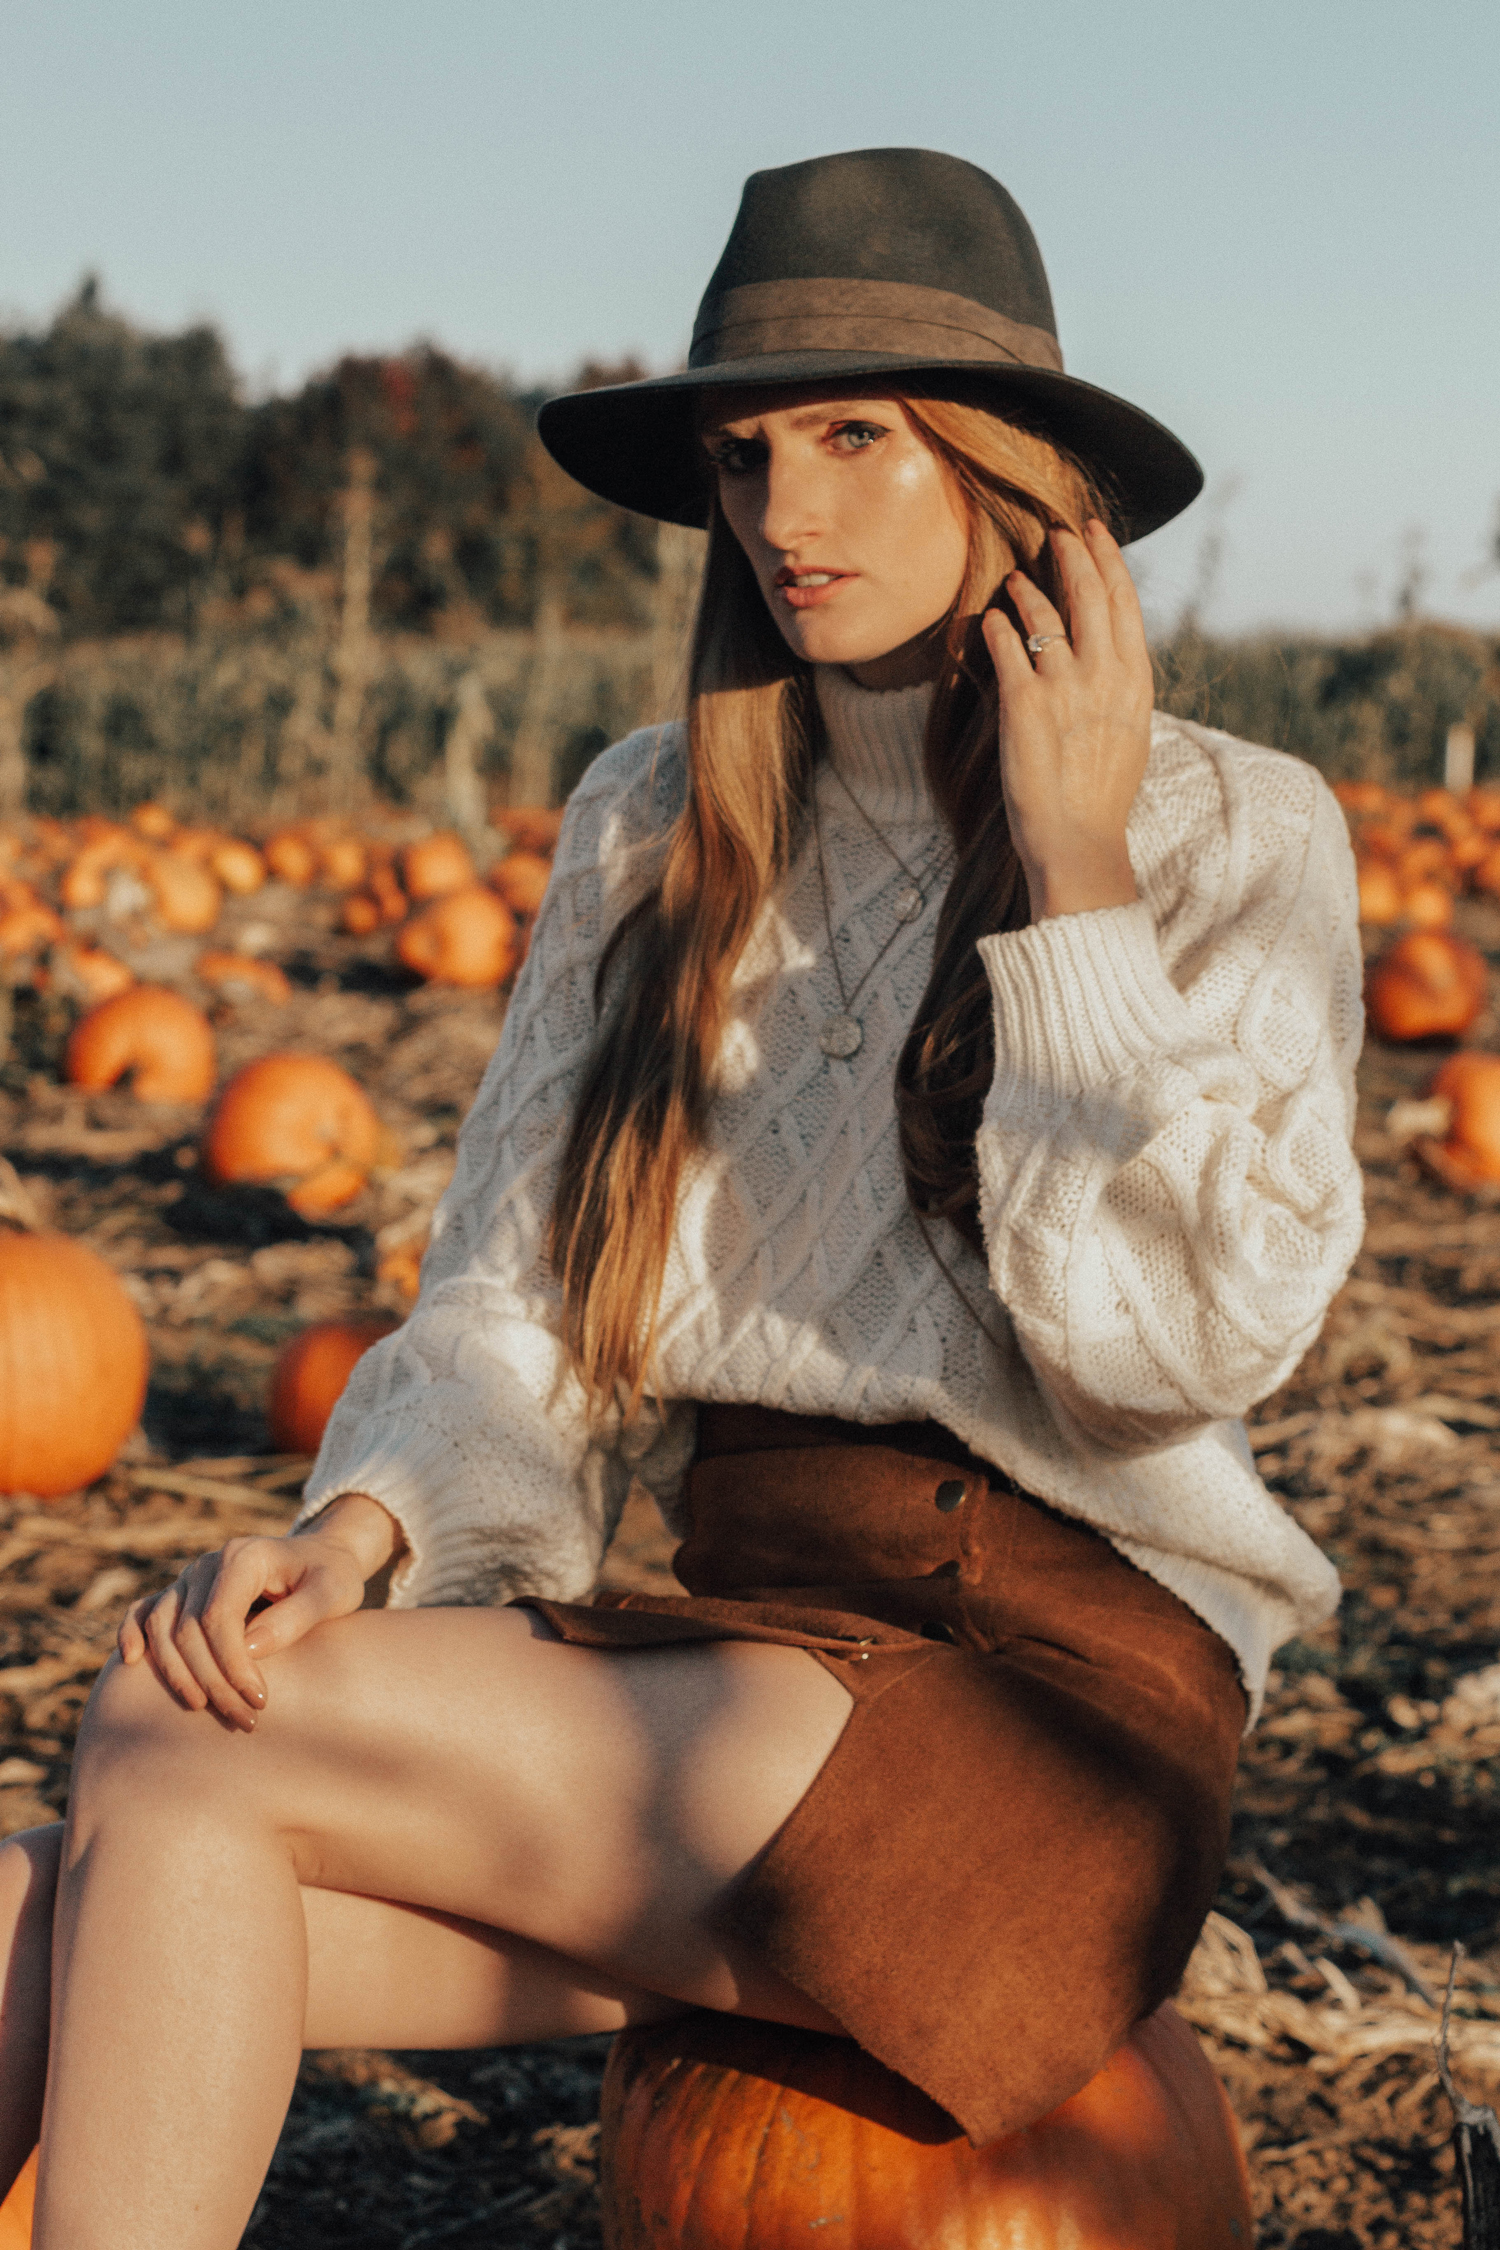 Sweater and Skirt Outfit At The Pumpkin Patch